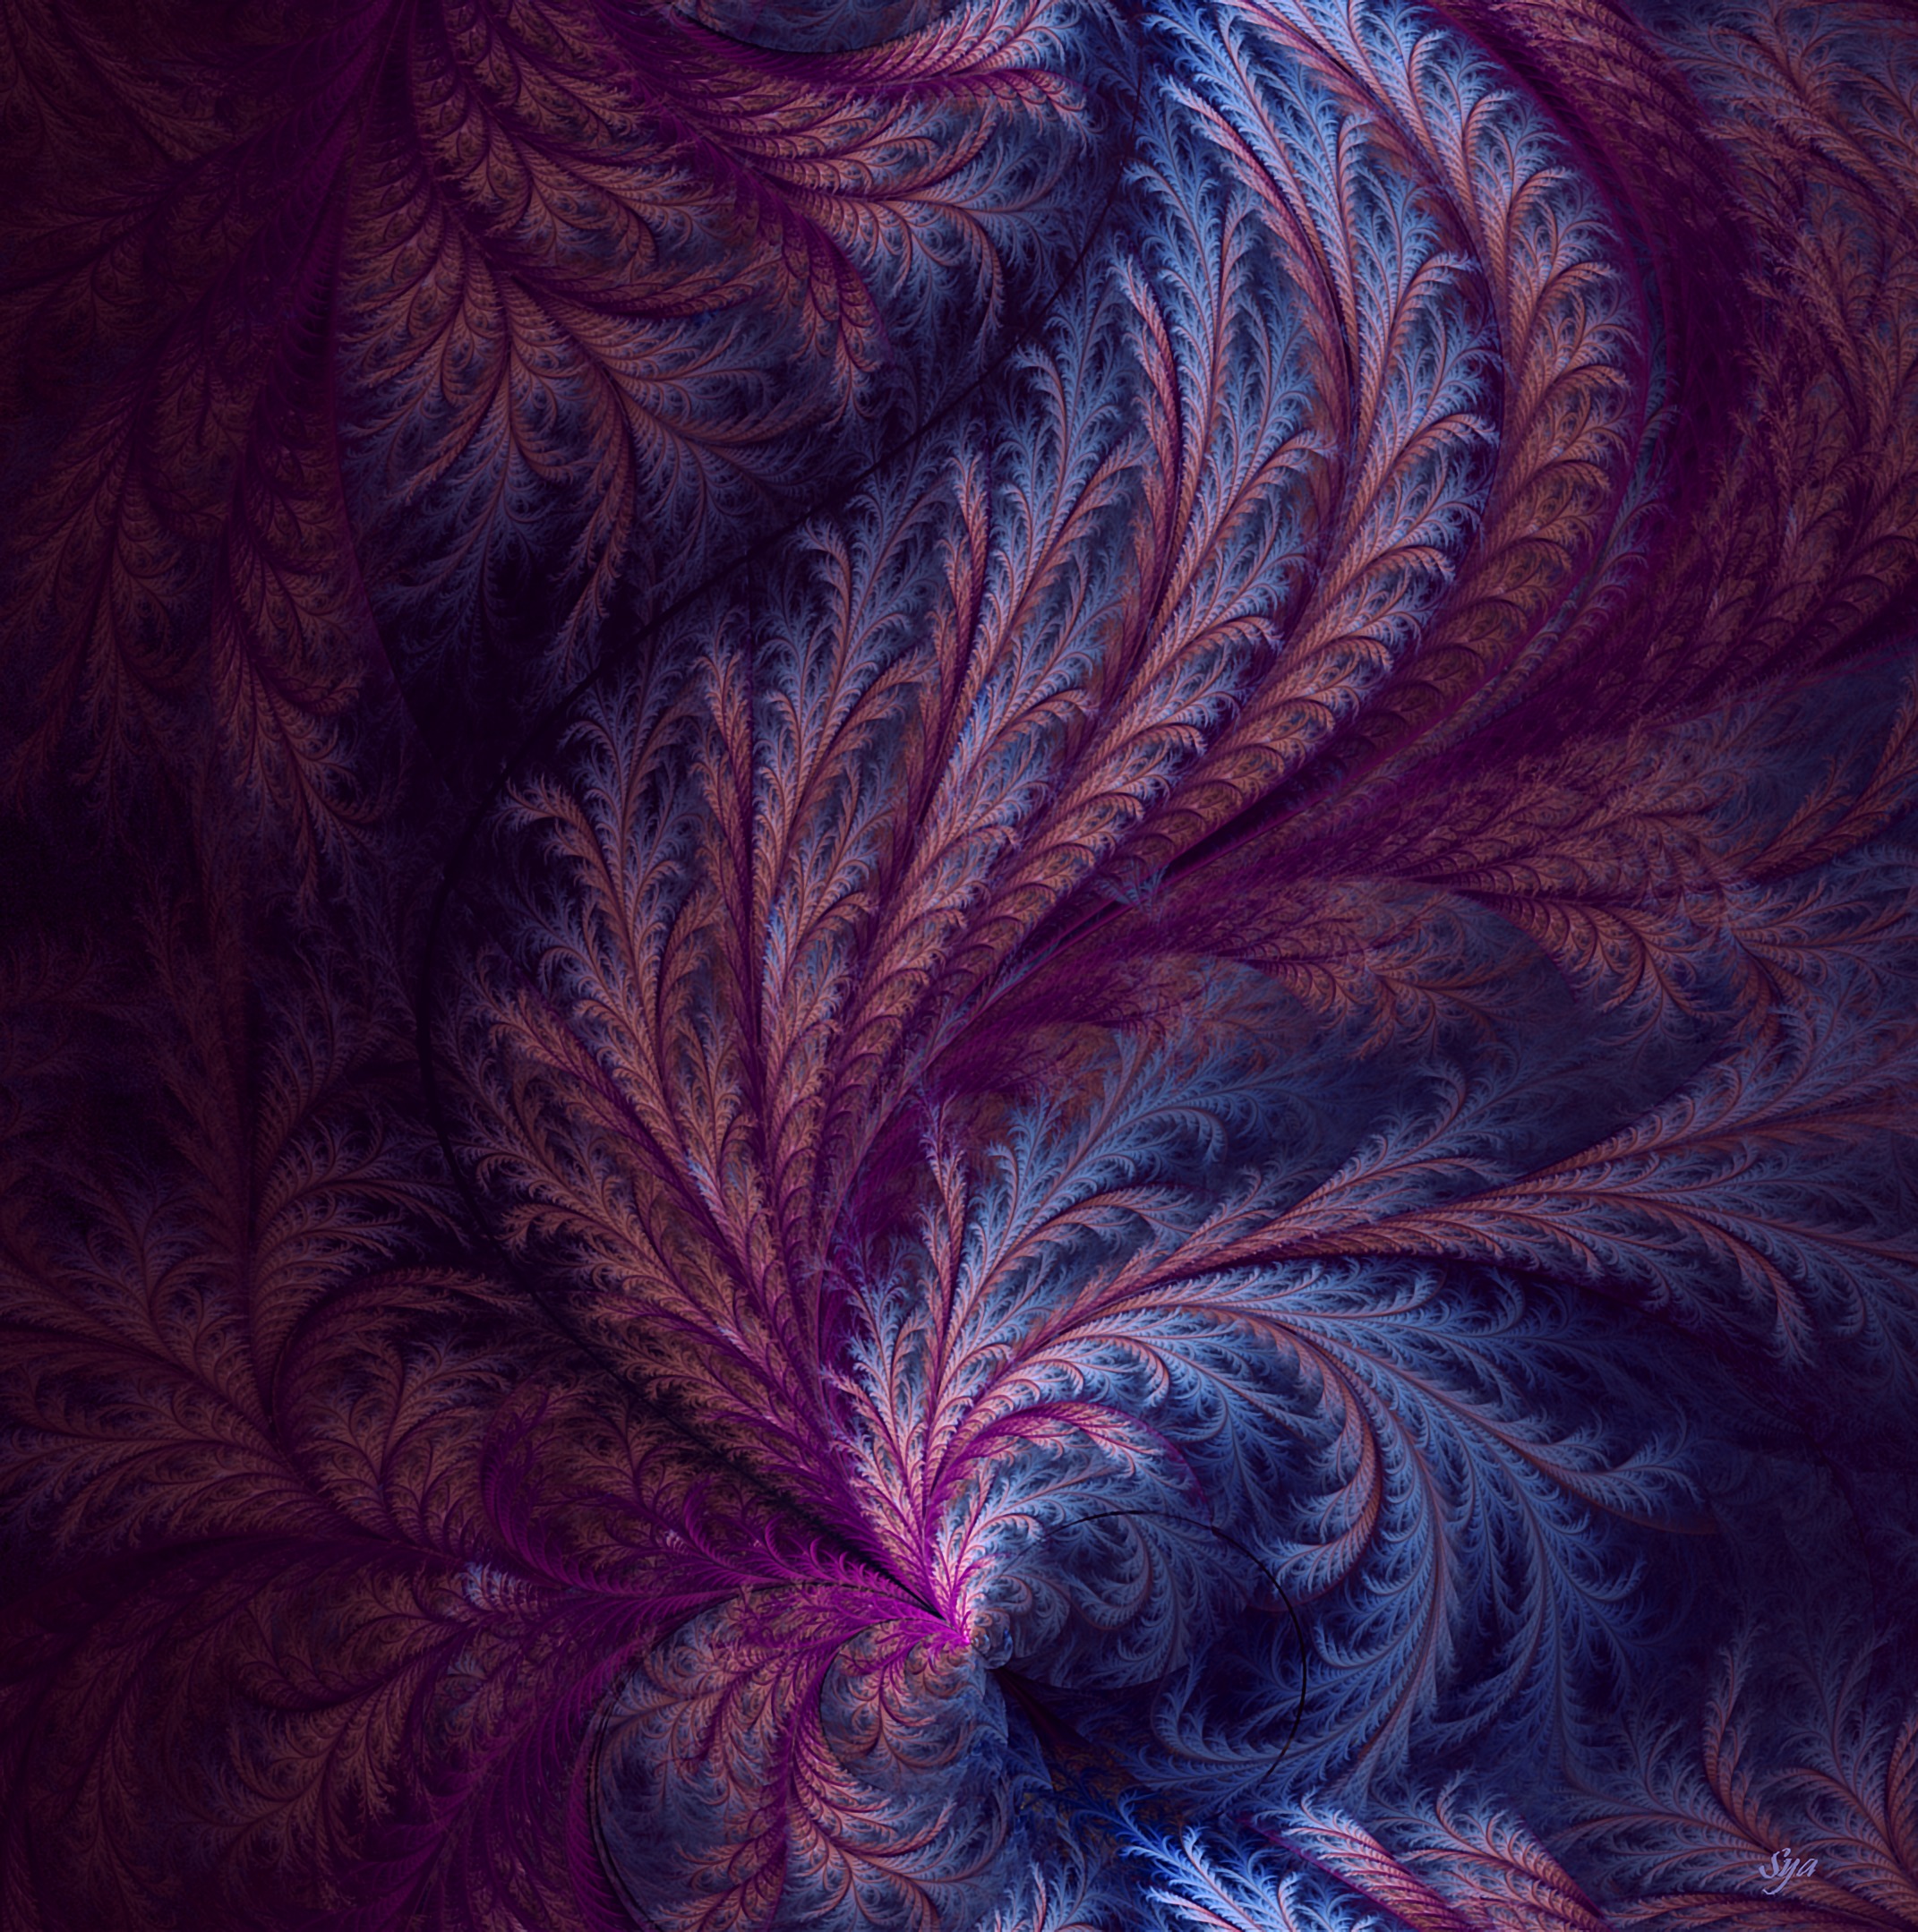 pattern, fractal, confused, branchy, abstract, intricate, branched iphone wallpaper